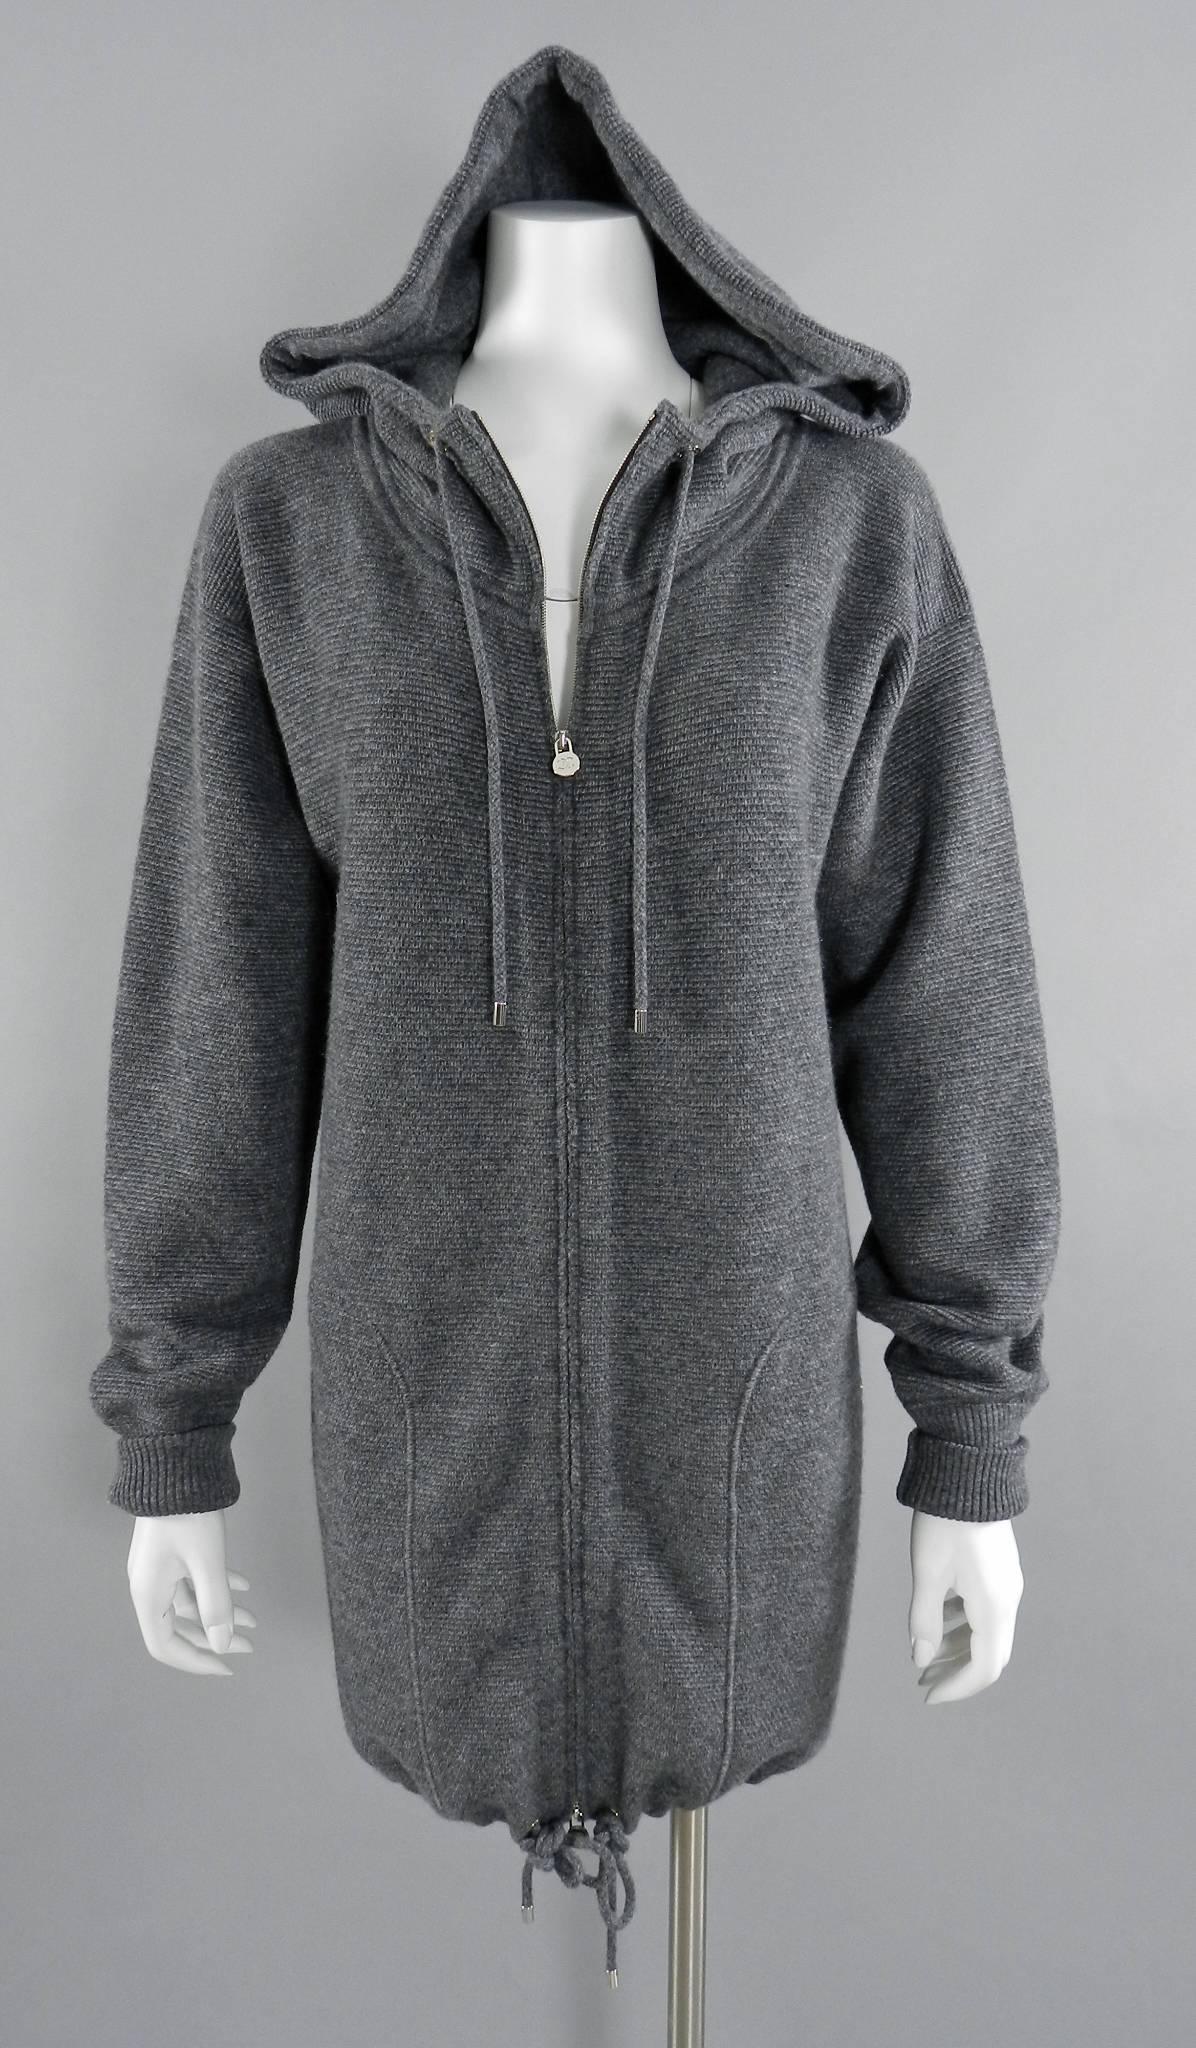 Chanel Grey Cashmere hoodie Sweater.  Silvertone metal zipper and hardware, side hip pockets, and drawstring hem.  Tagged size FR 38 (USA 6 - can fit 8).  Garment measures 41